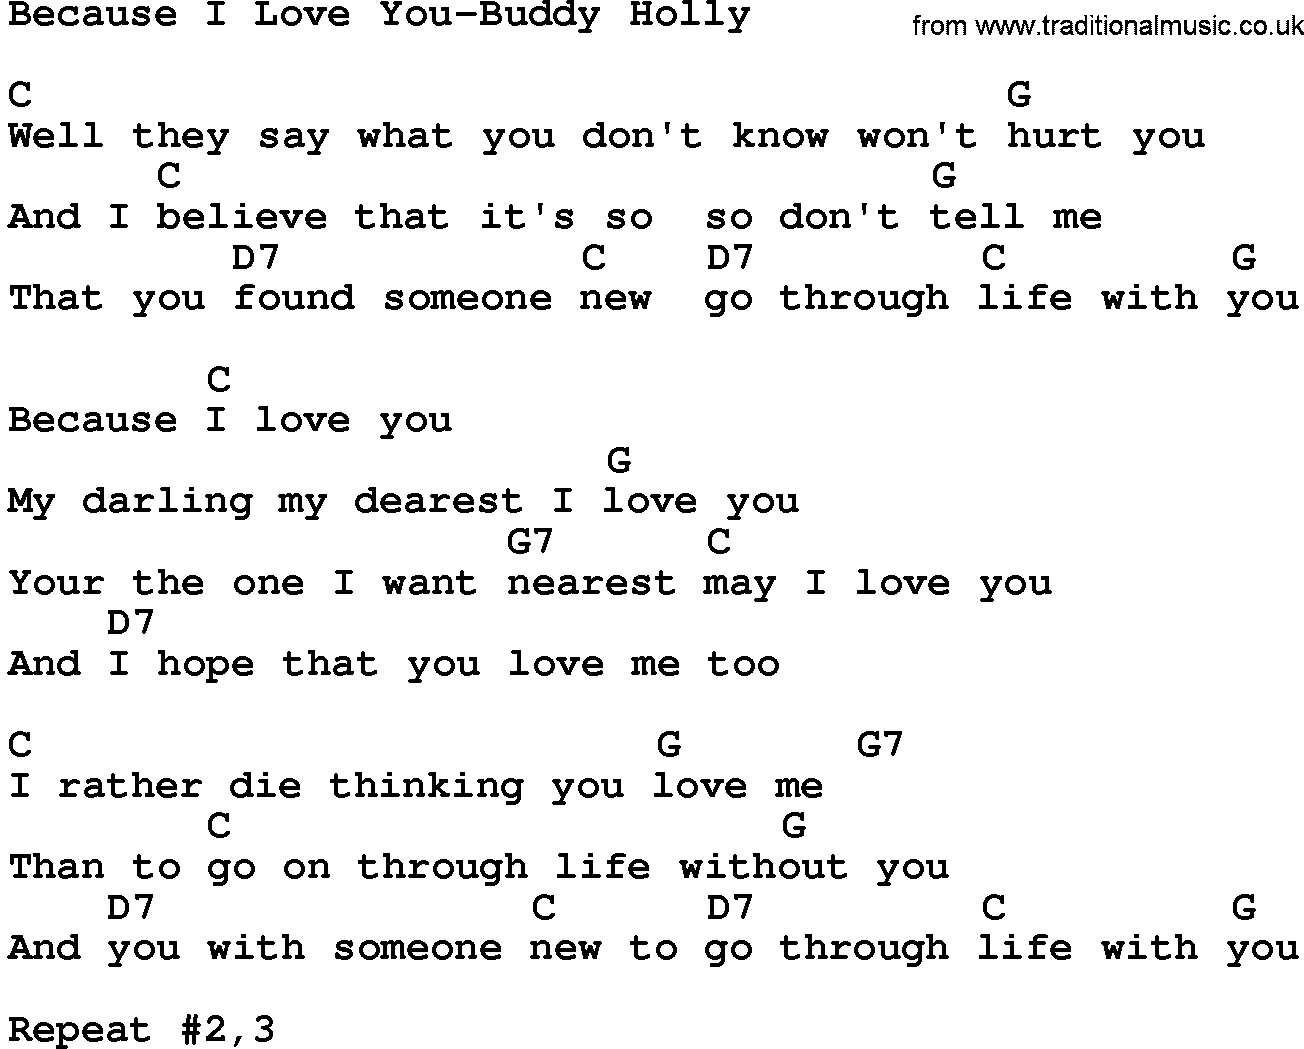 Country music song: Because I Love You-Buddy Holly lyrics and chords